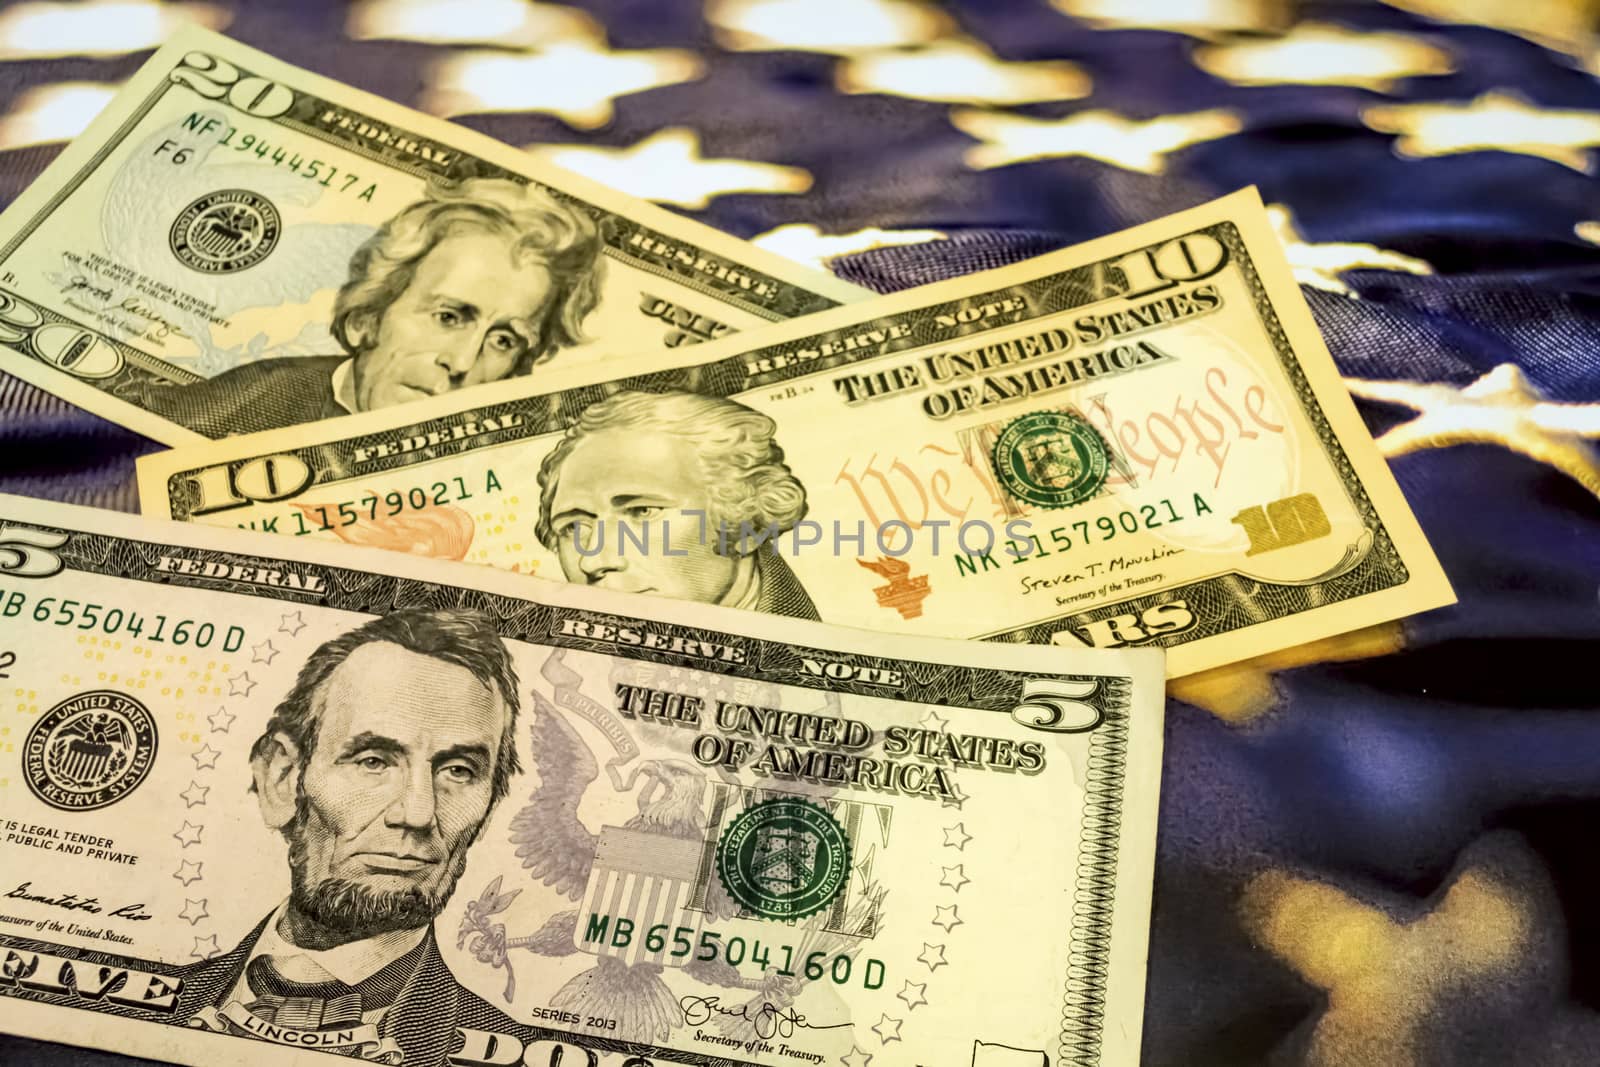 close up US dollar banknotes on background.